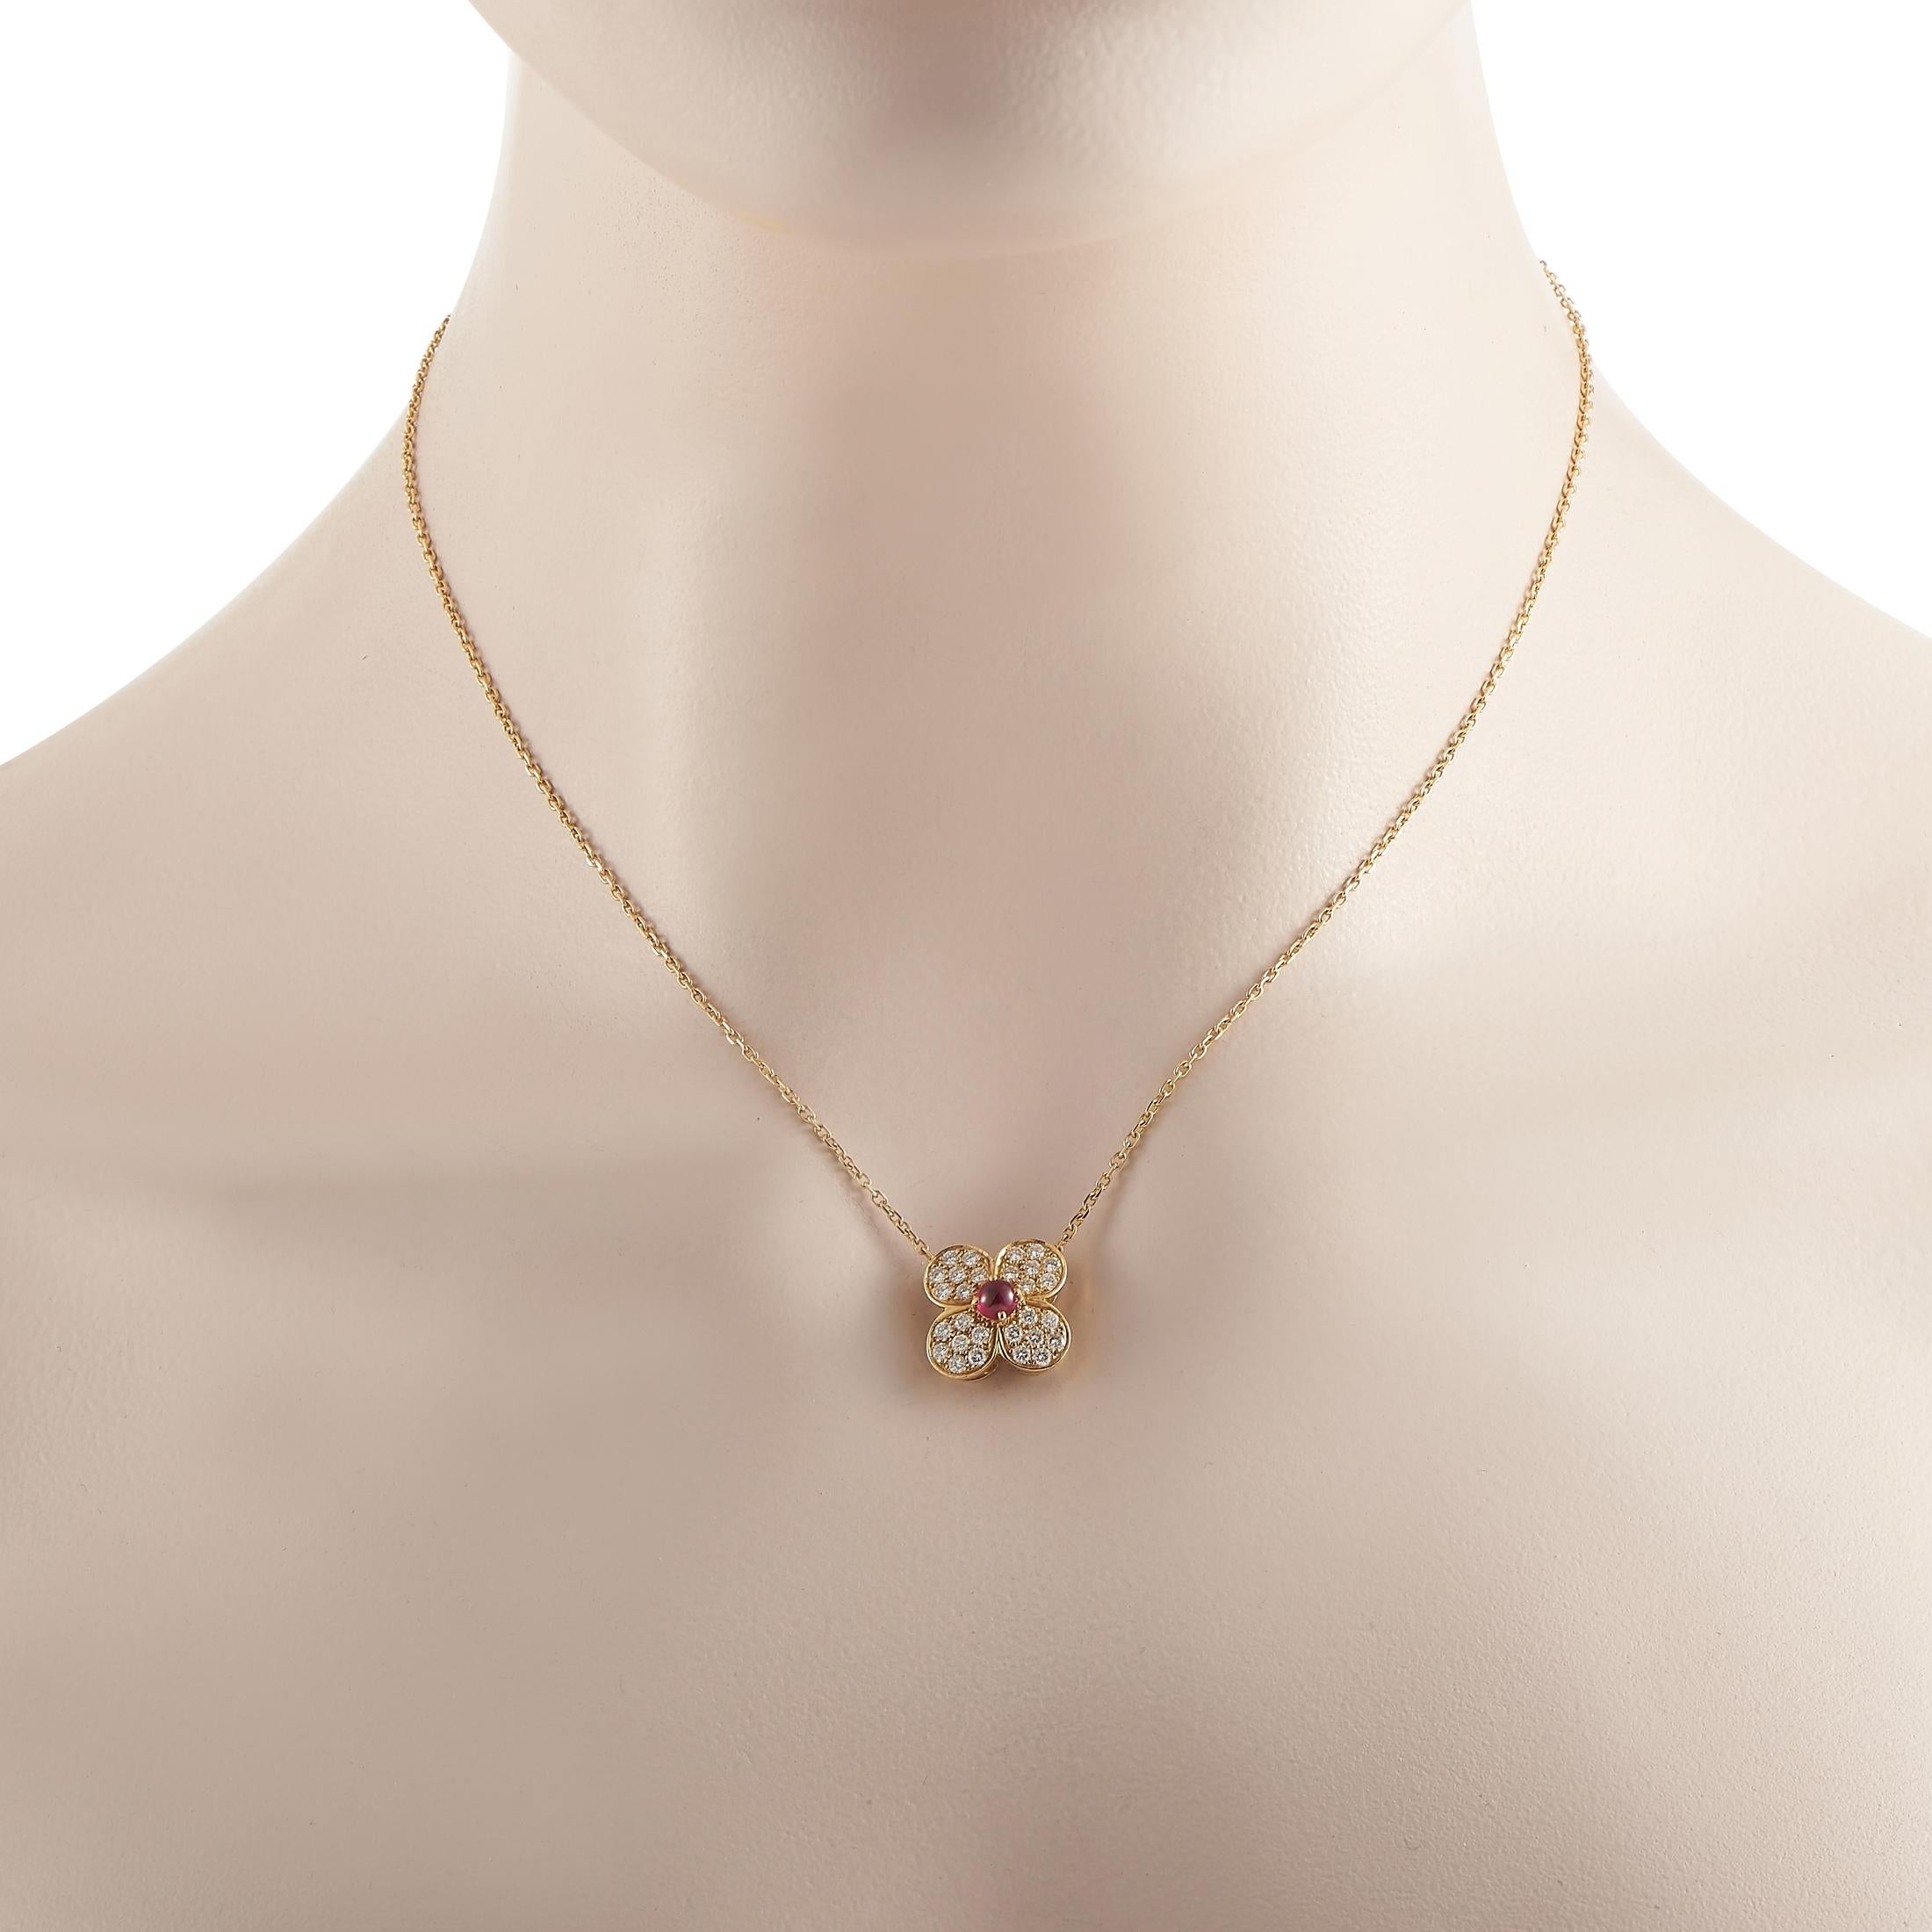 This necklace from Van Cleef & Arpels is elegant, exquisite, and understated. Crafted from 18K Yellow Gold, it features a pendant measuring 0.5” round suspended at the center of a 16” chain. The iconic clover-shaped pendant is accented by diamonds